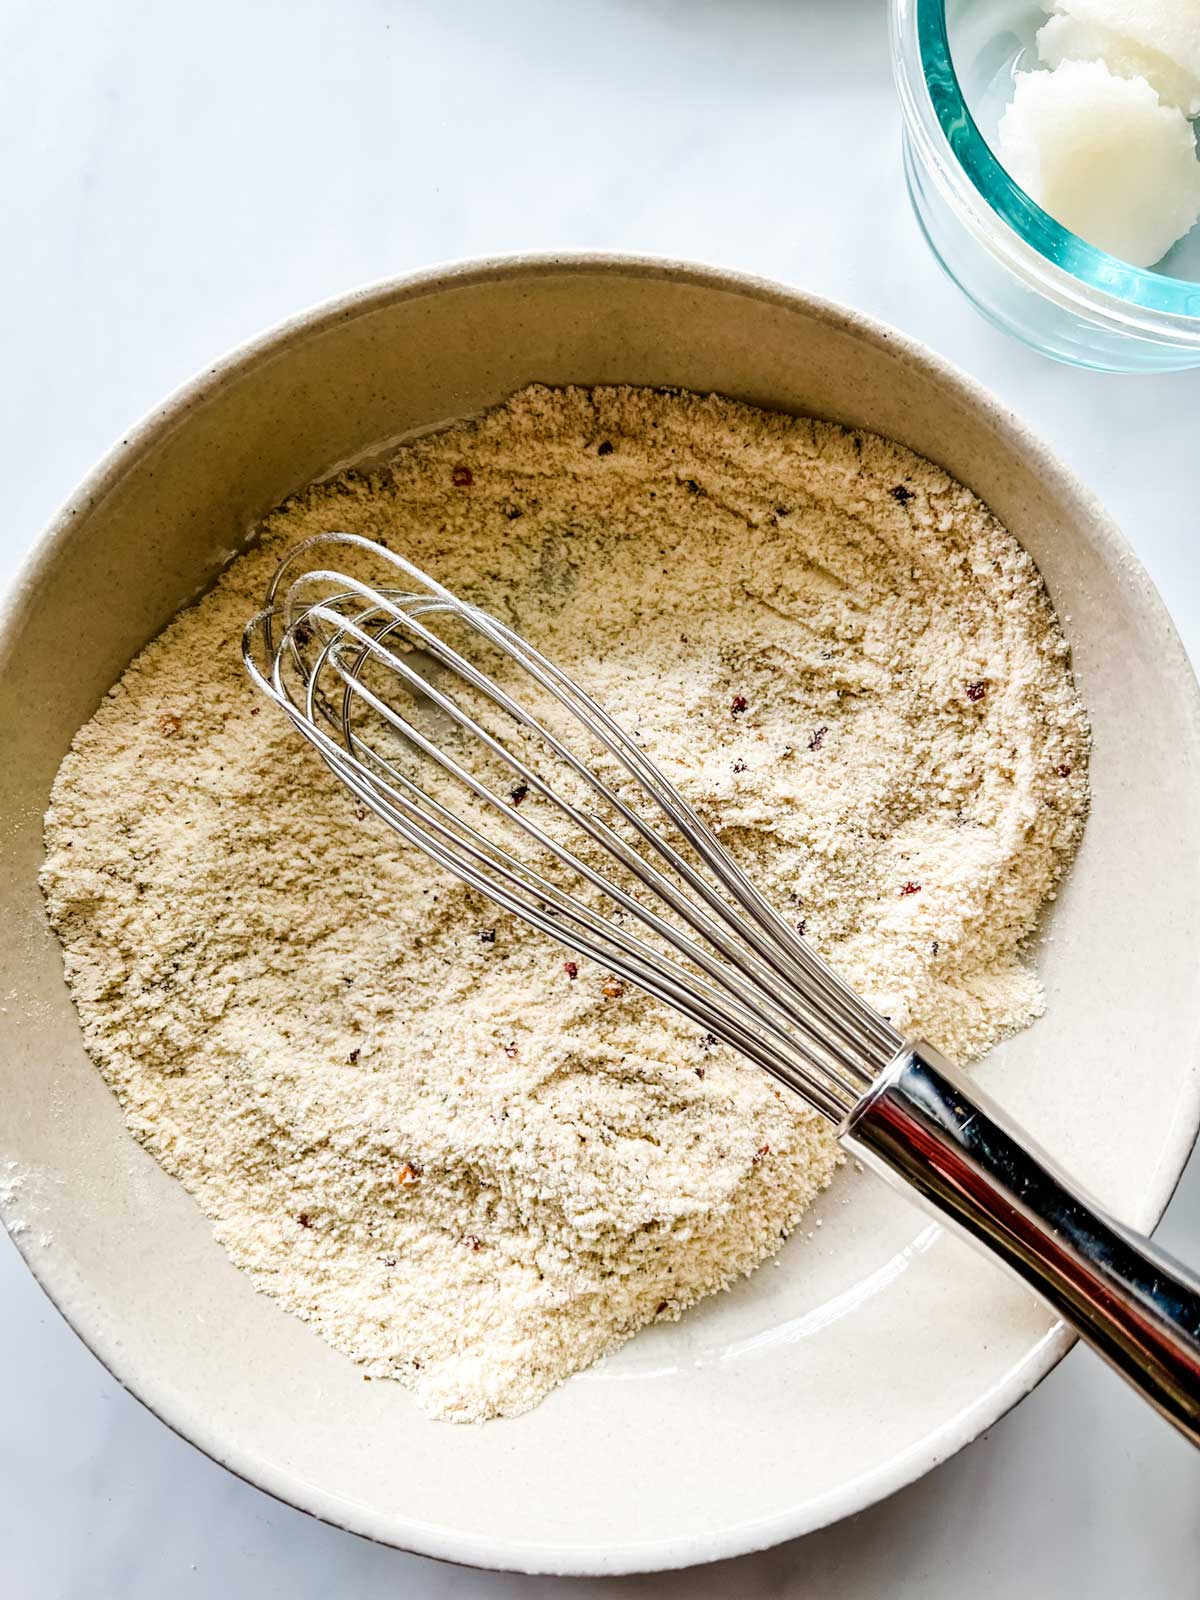 Coconut flour and seasonings being whisked together in a bowl.